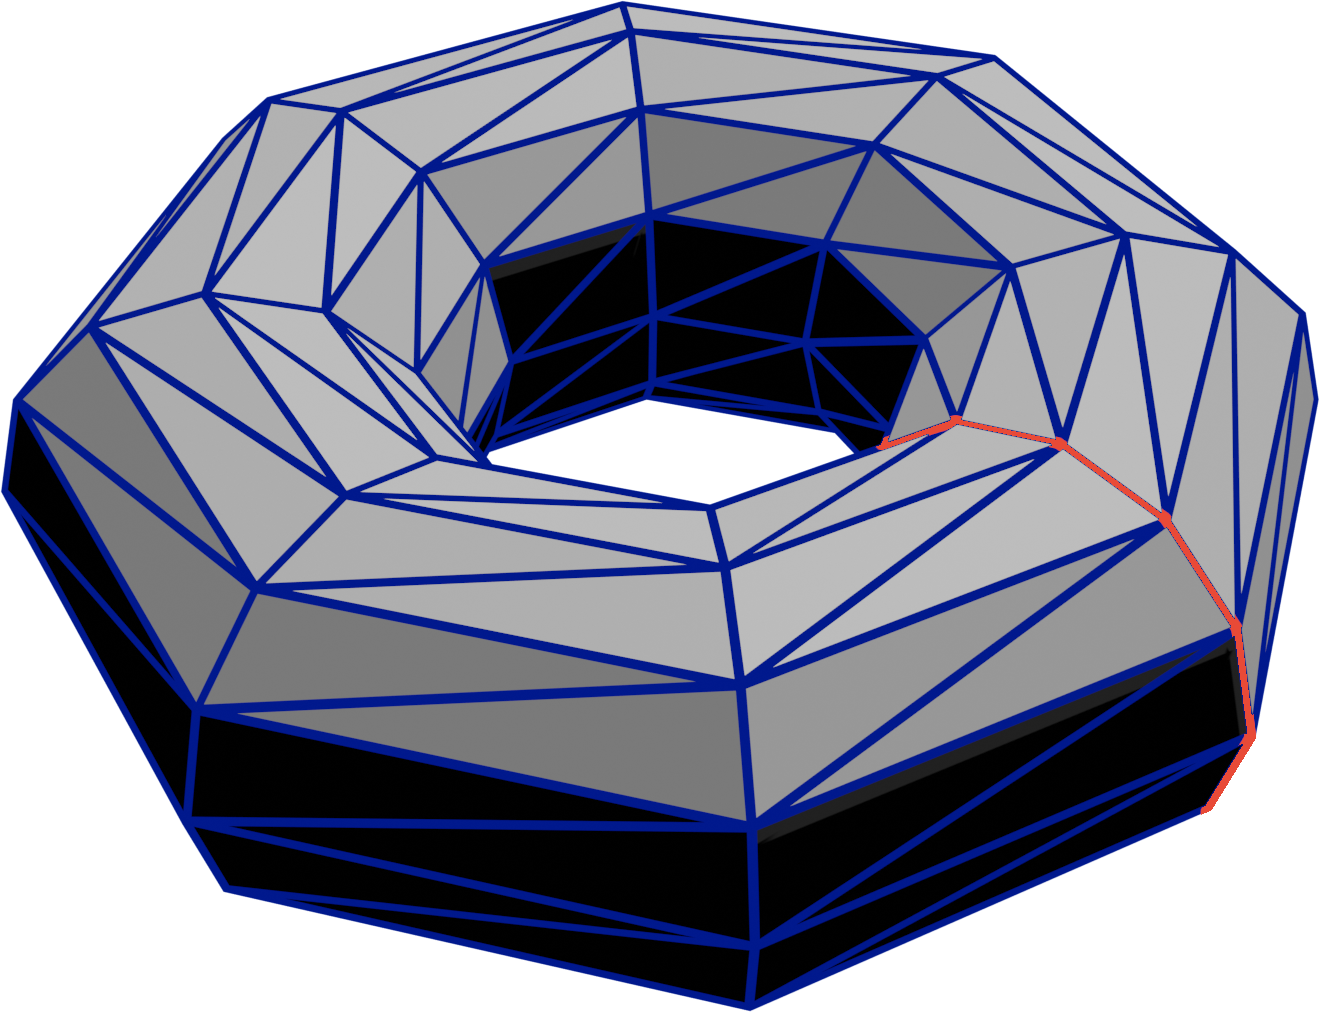 An example torus with polygon boundaries drawn in blue and one of the 8 “rings” highlighted in orange. This torus has 12 points per ring, though that might not be obvious from the image.